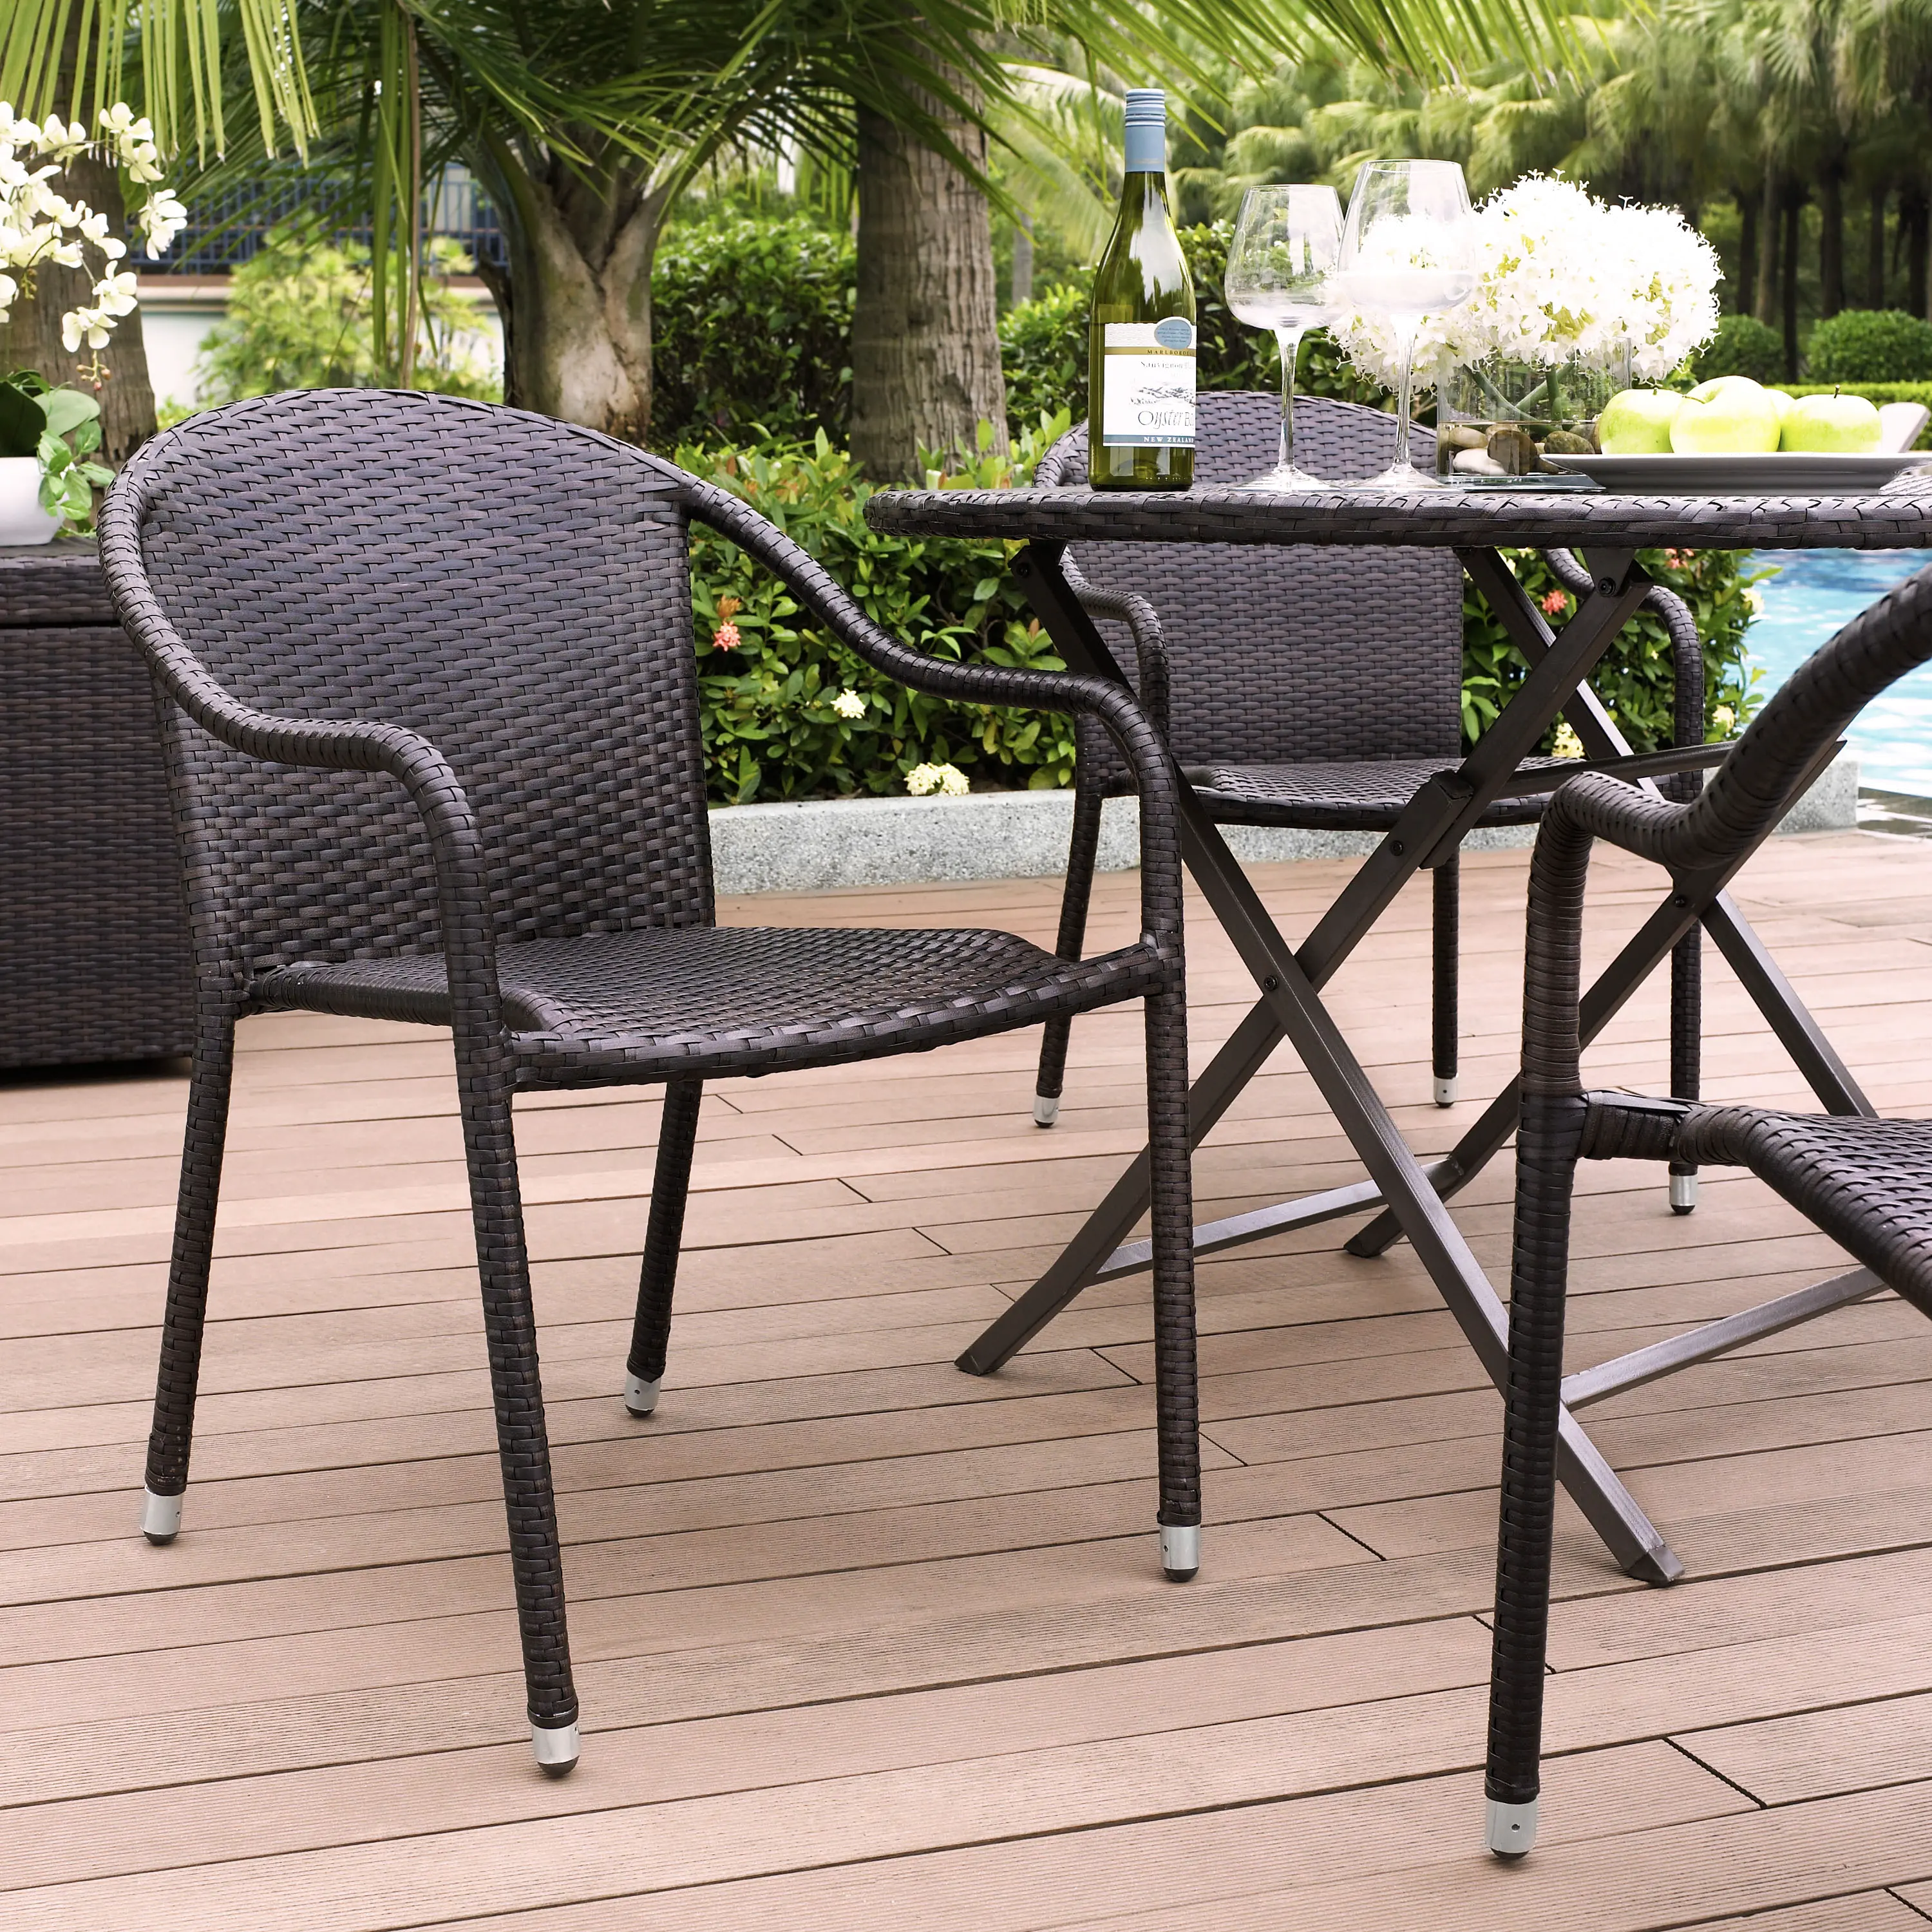 CO7109-BR Palm Harbor Stackable Wicker Patio Chairs, Set of  sku CO7109-BR